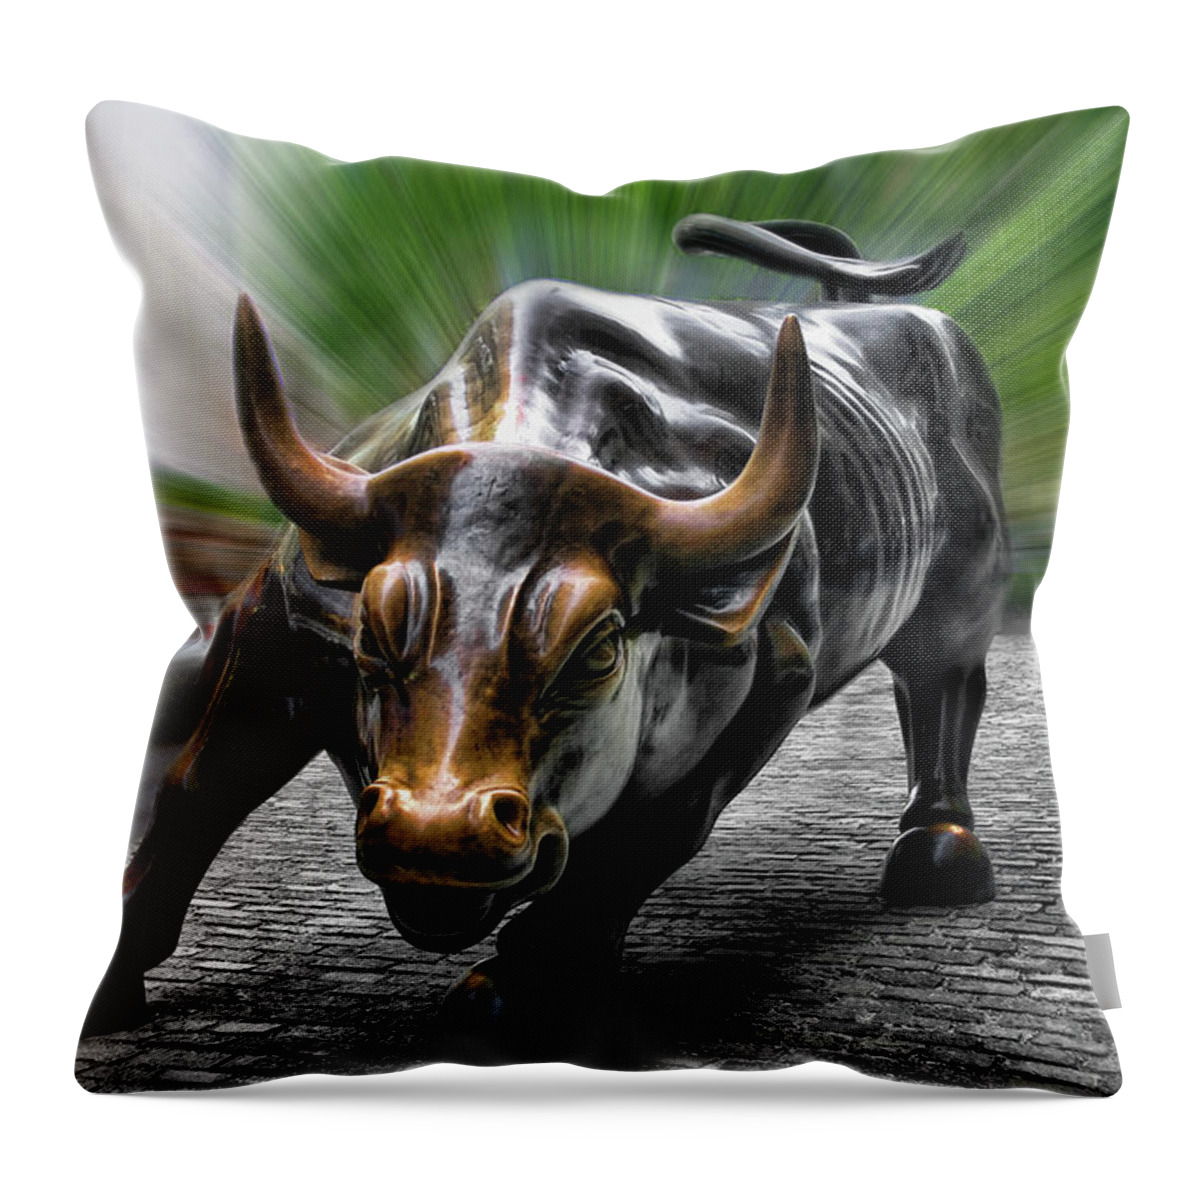 Wall Street Bull Throw Pillow featuring the photograph Wall Street Bull by Wes and Dotty Weber